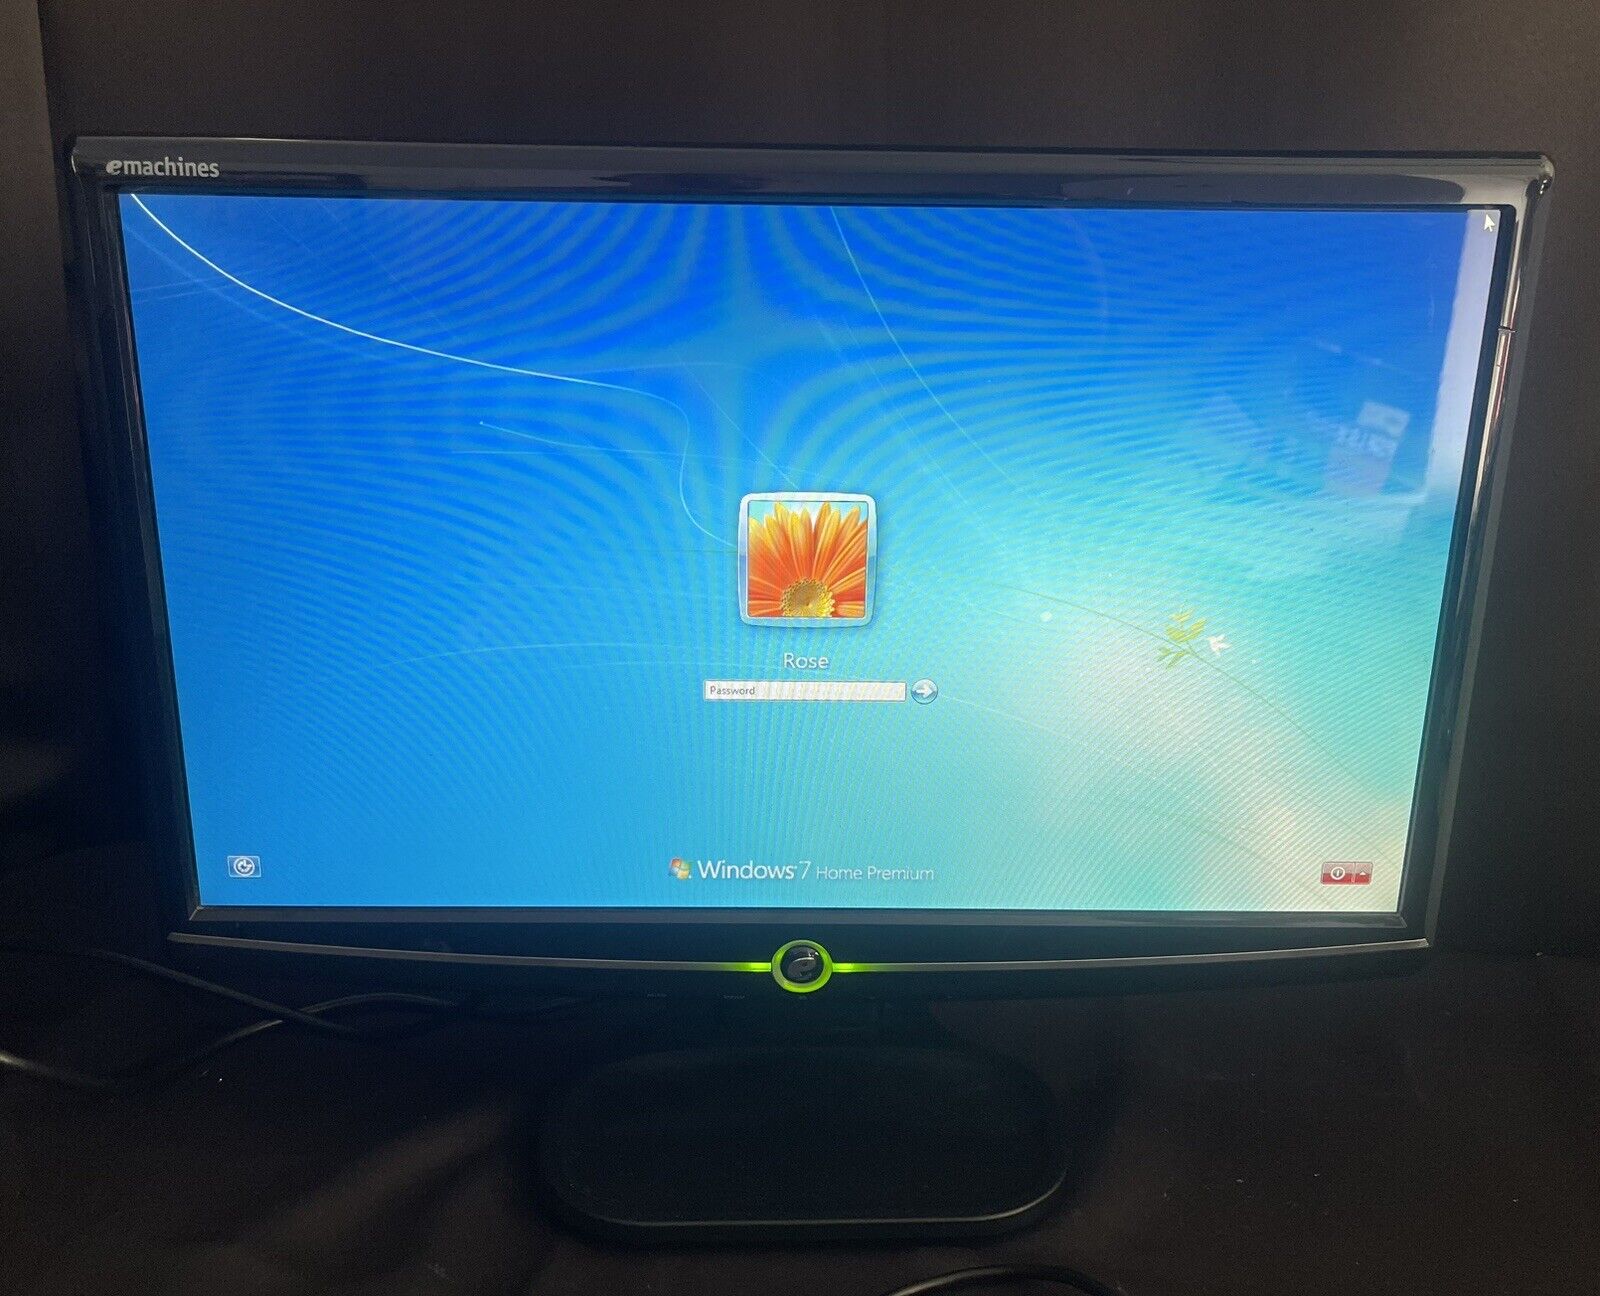 Emachines E182H D 19” LCD Widescreen Monitor With Cords